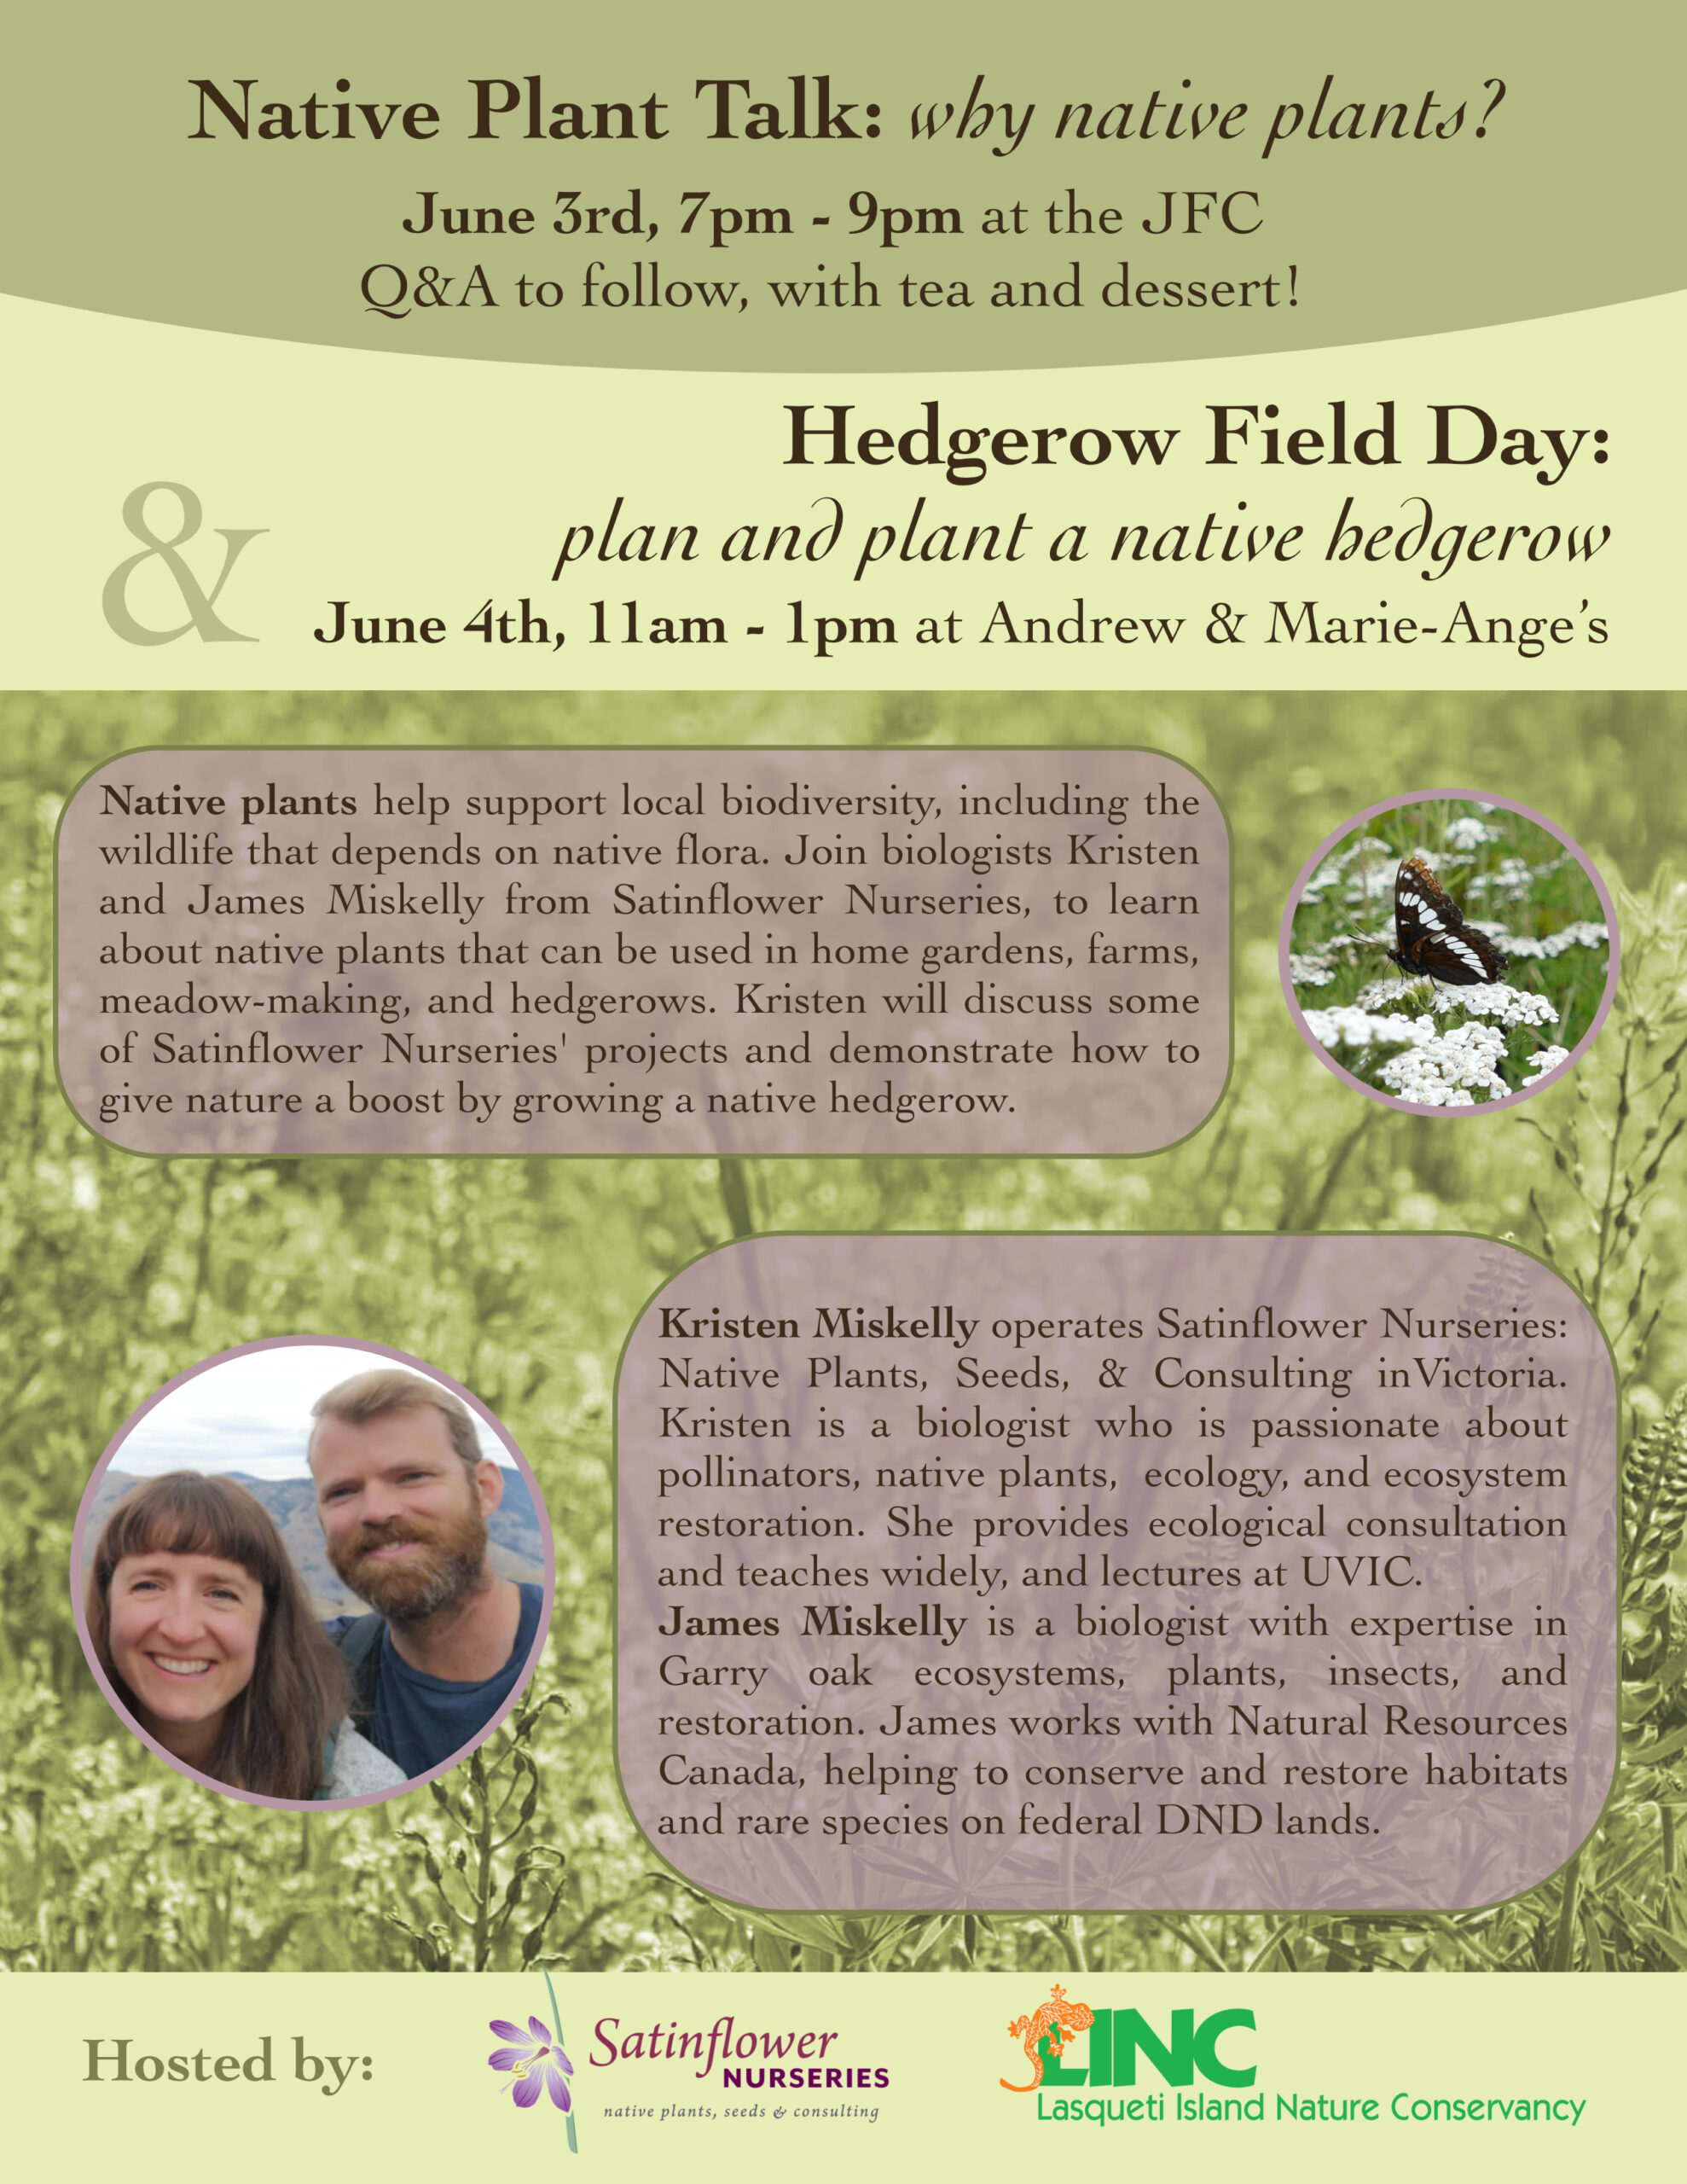 June 3rd & 4th – Native Plant Talk & Hedgerow Field Day!